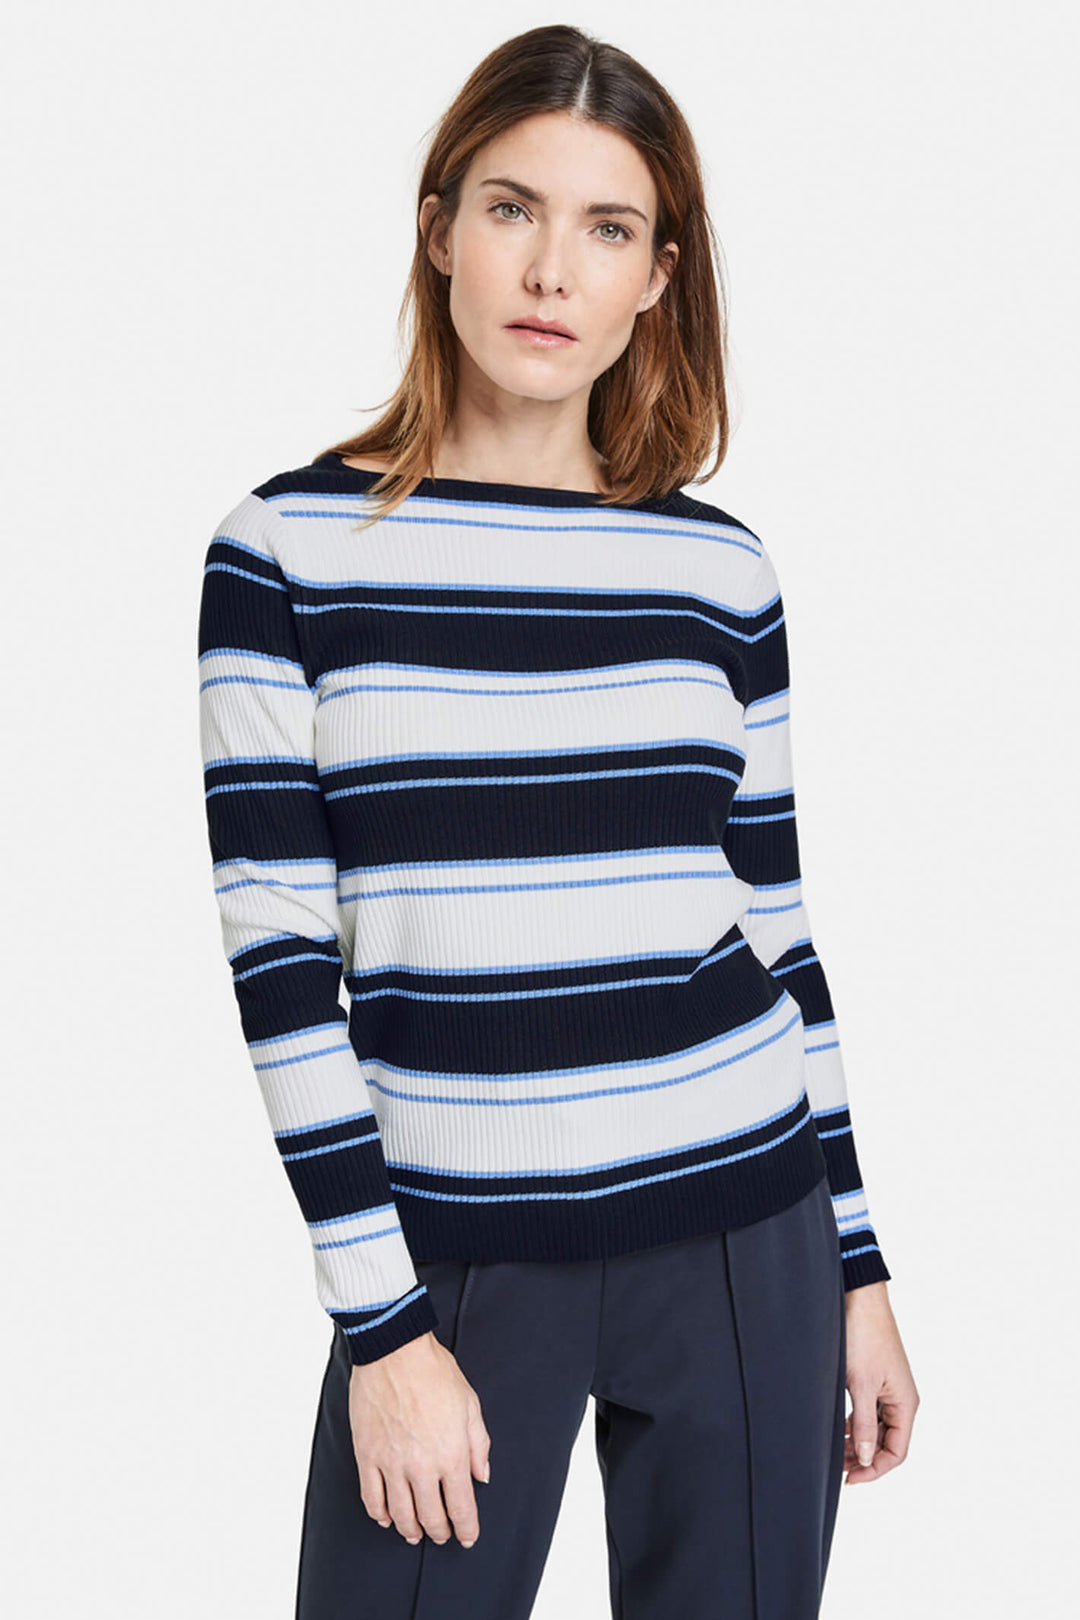 Gerry Weber 870532 Navy & Blue Stripe Knitted Jumper - Experience Boutique